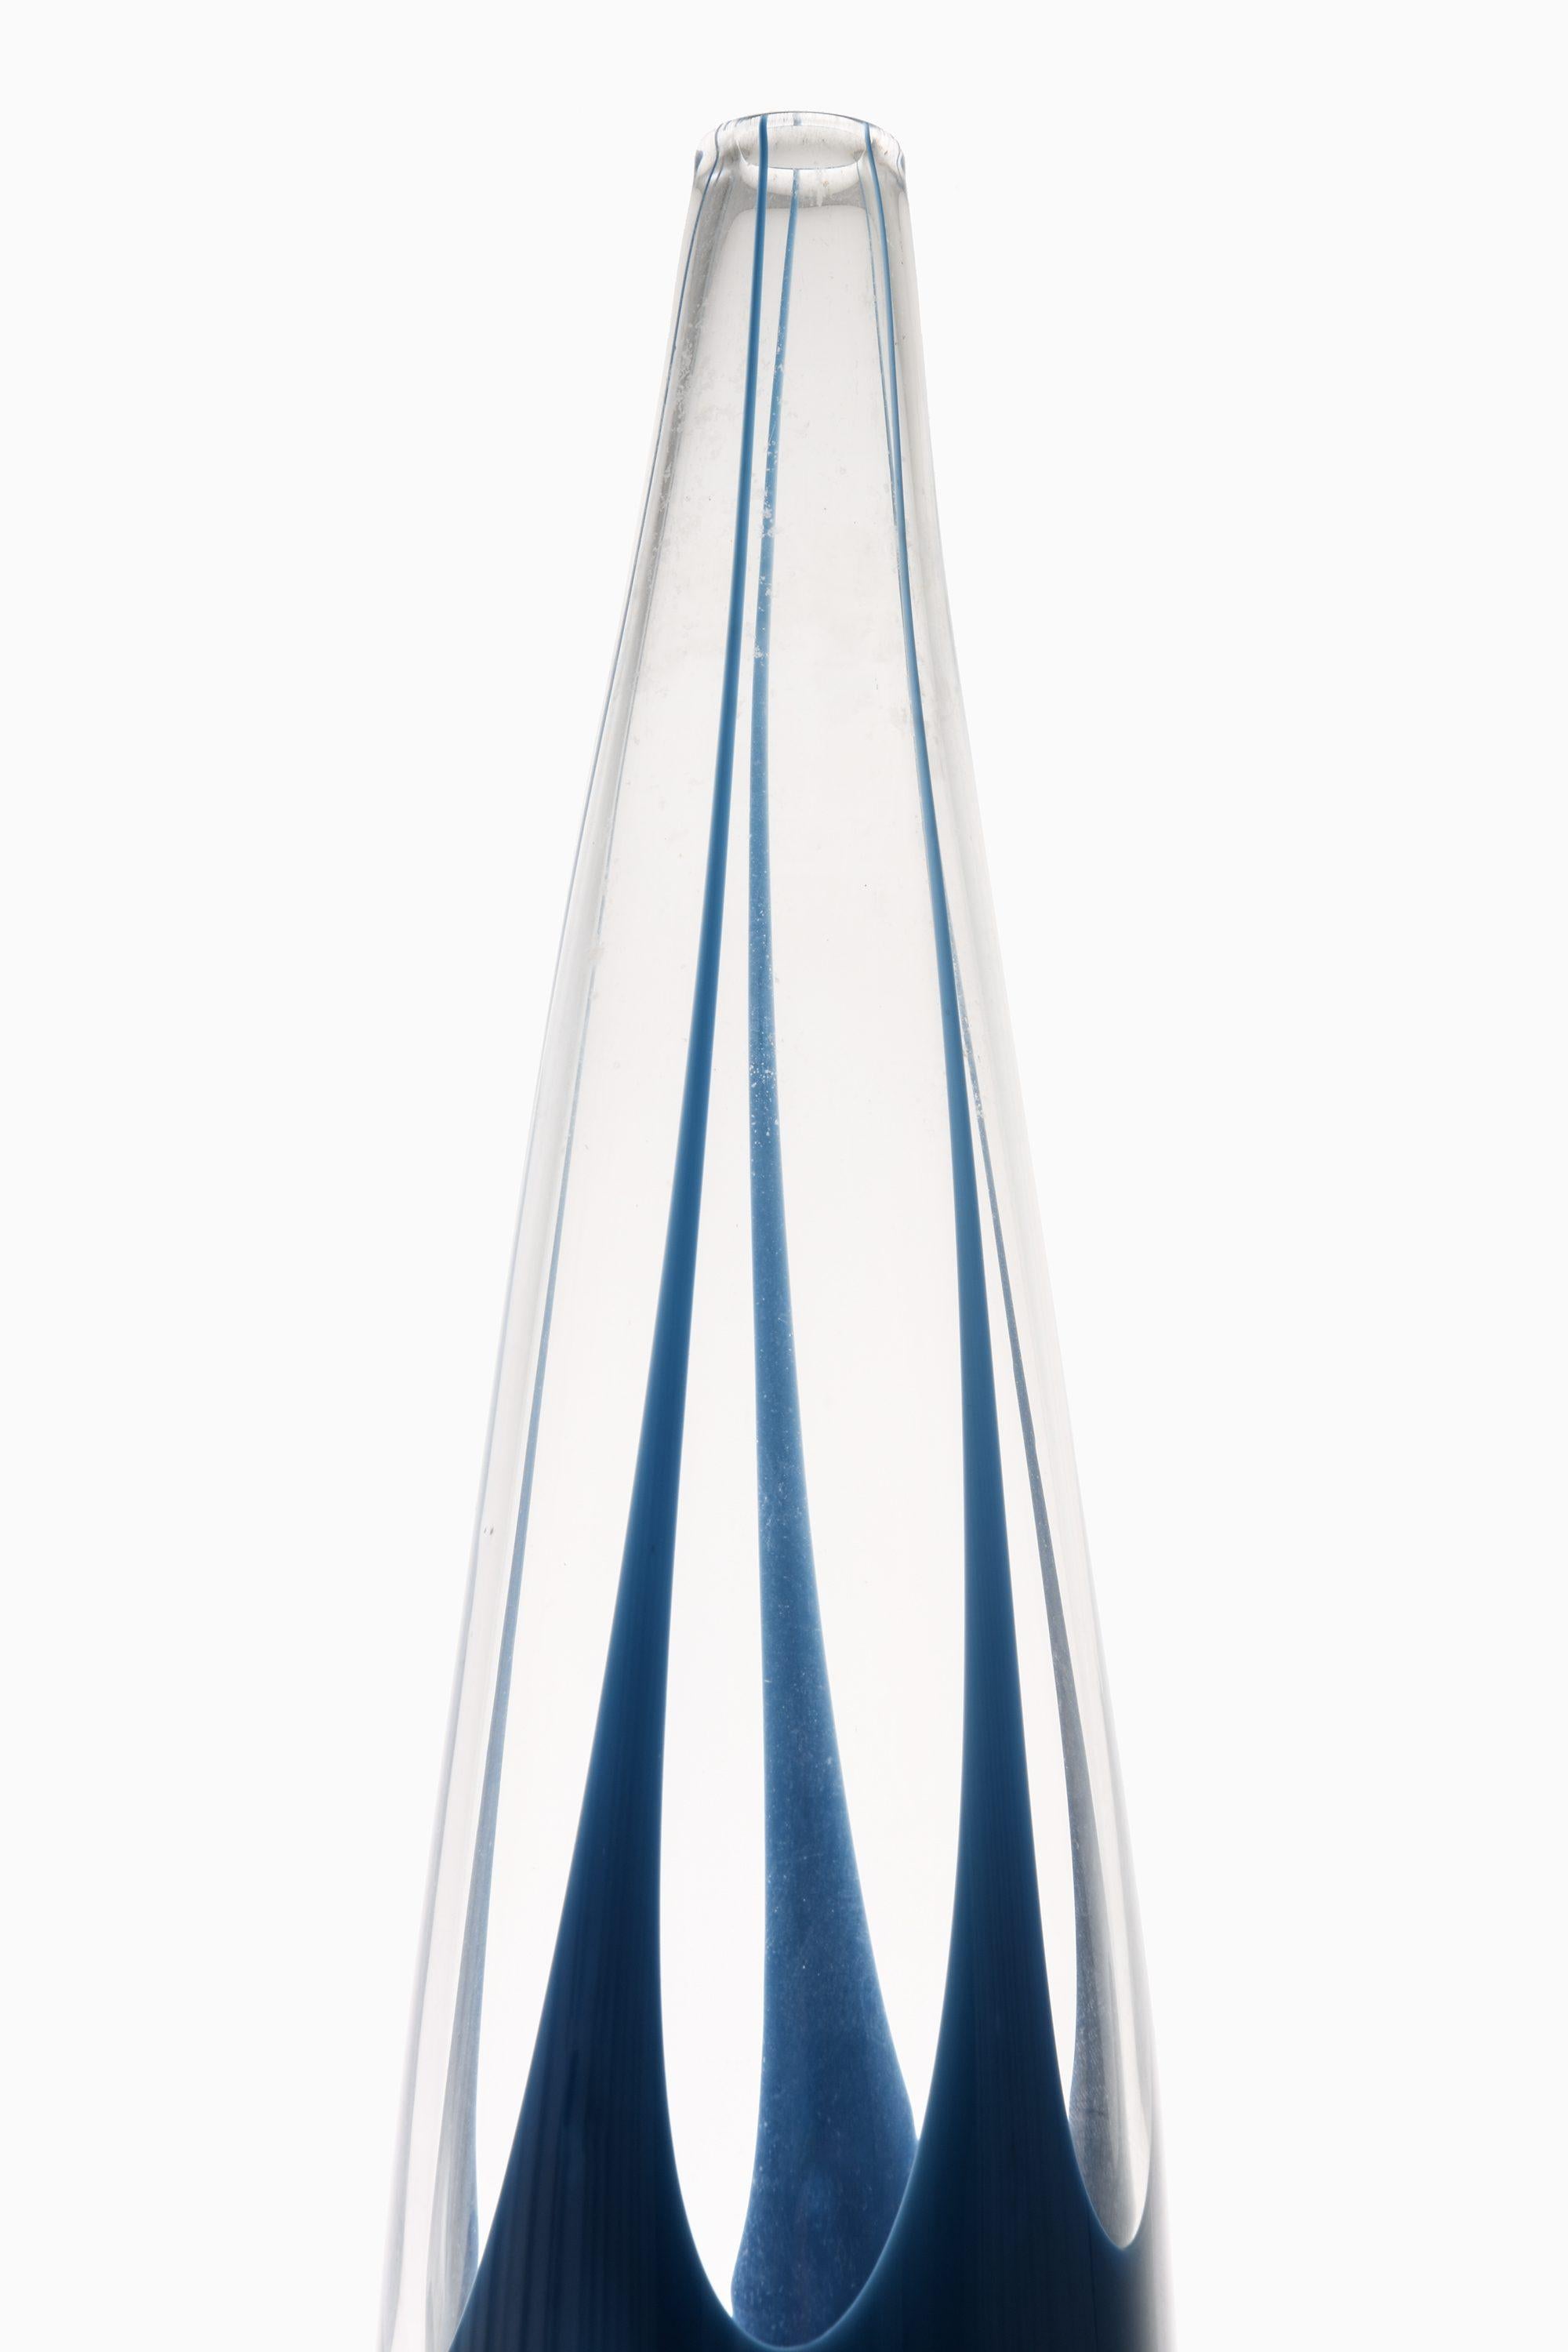 Glass Vase in Blue by Vicke Lindstrand, 1960's

Additional Information:
Material: Glass
Style: Mid century, Scandinavian
Produced by Kosta in Sweden
Signed LH 1194 Lindstrand Kosta
Dimensions (W x D x H): 8.5 x 8.5 x 34.5 cm
Condition: Good vintage